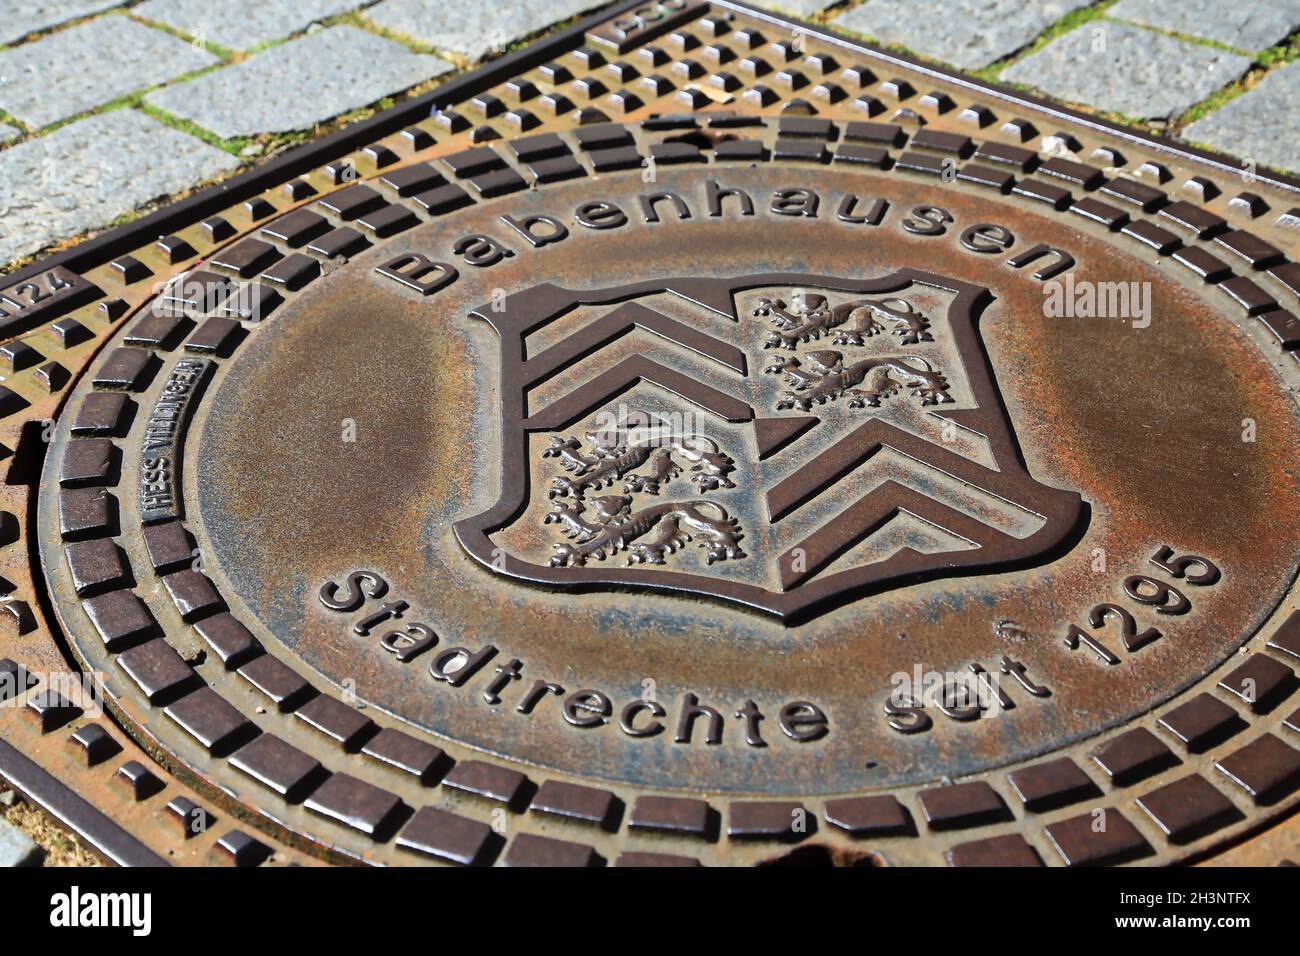 Manhole cover with coat of arms of Babenhausen Stock Photo